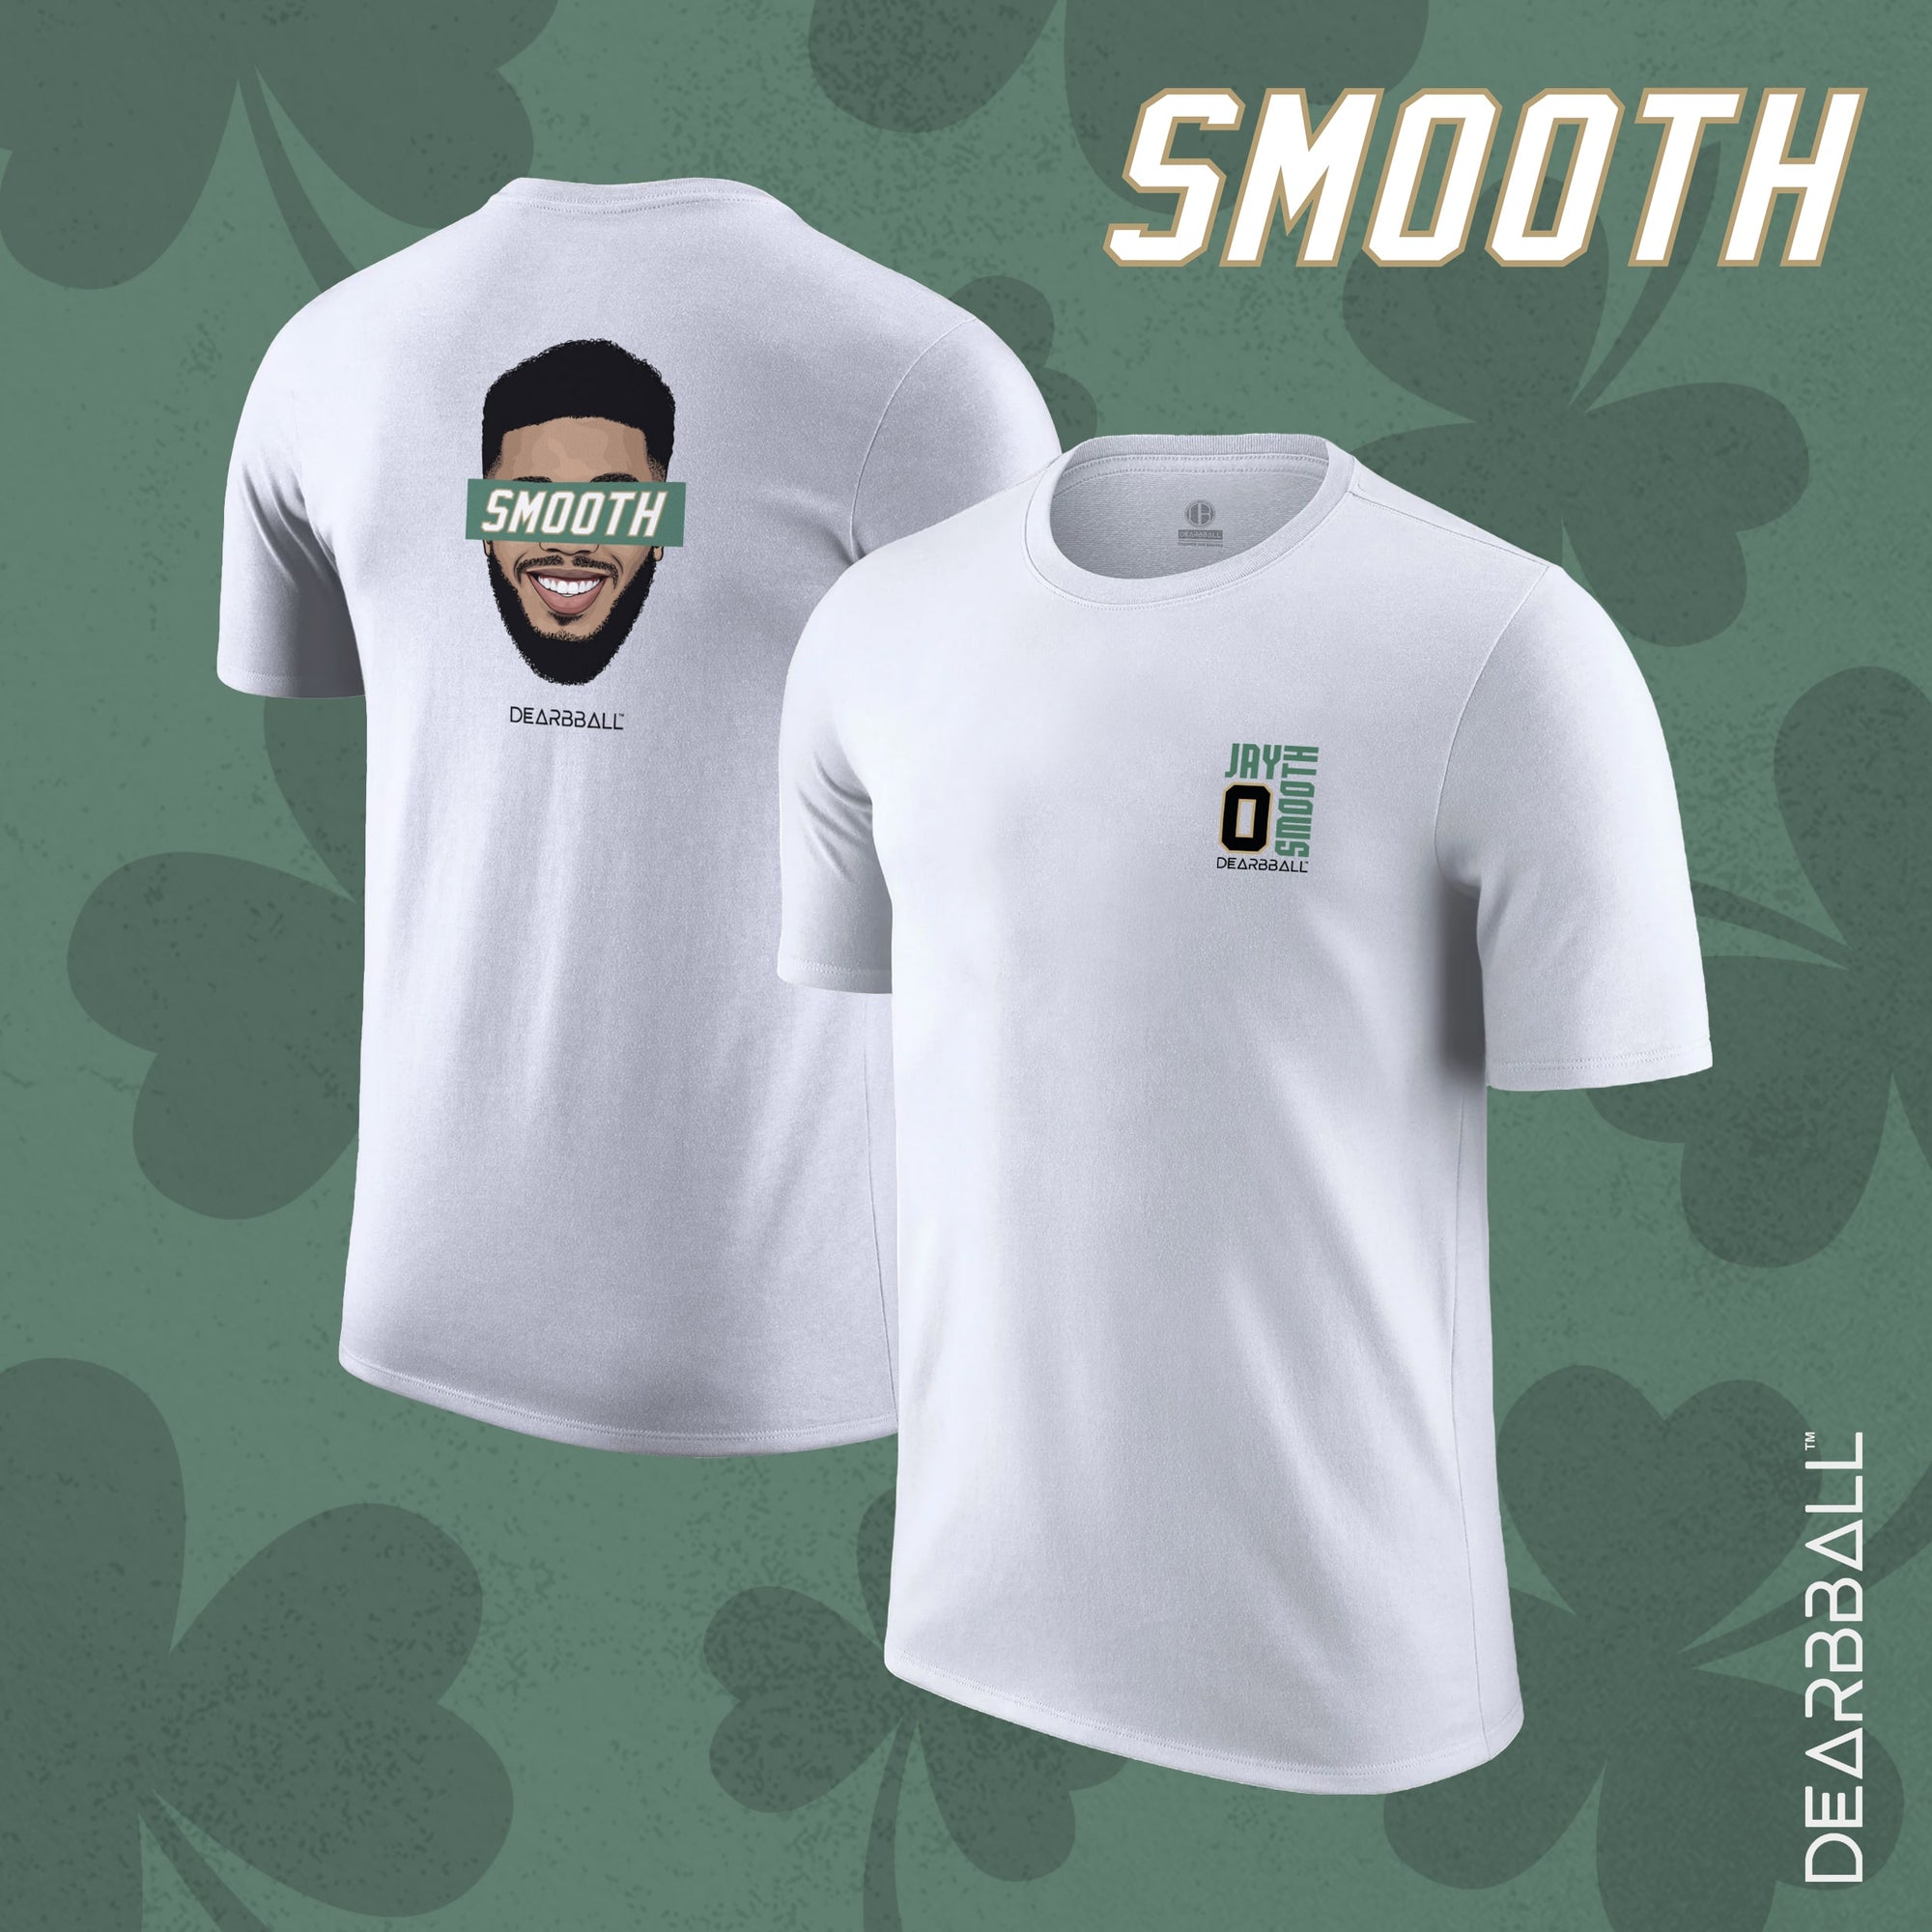 DearBBall T-Shirt - SMOOTH Boston Patch Brodé Premium Edition